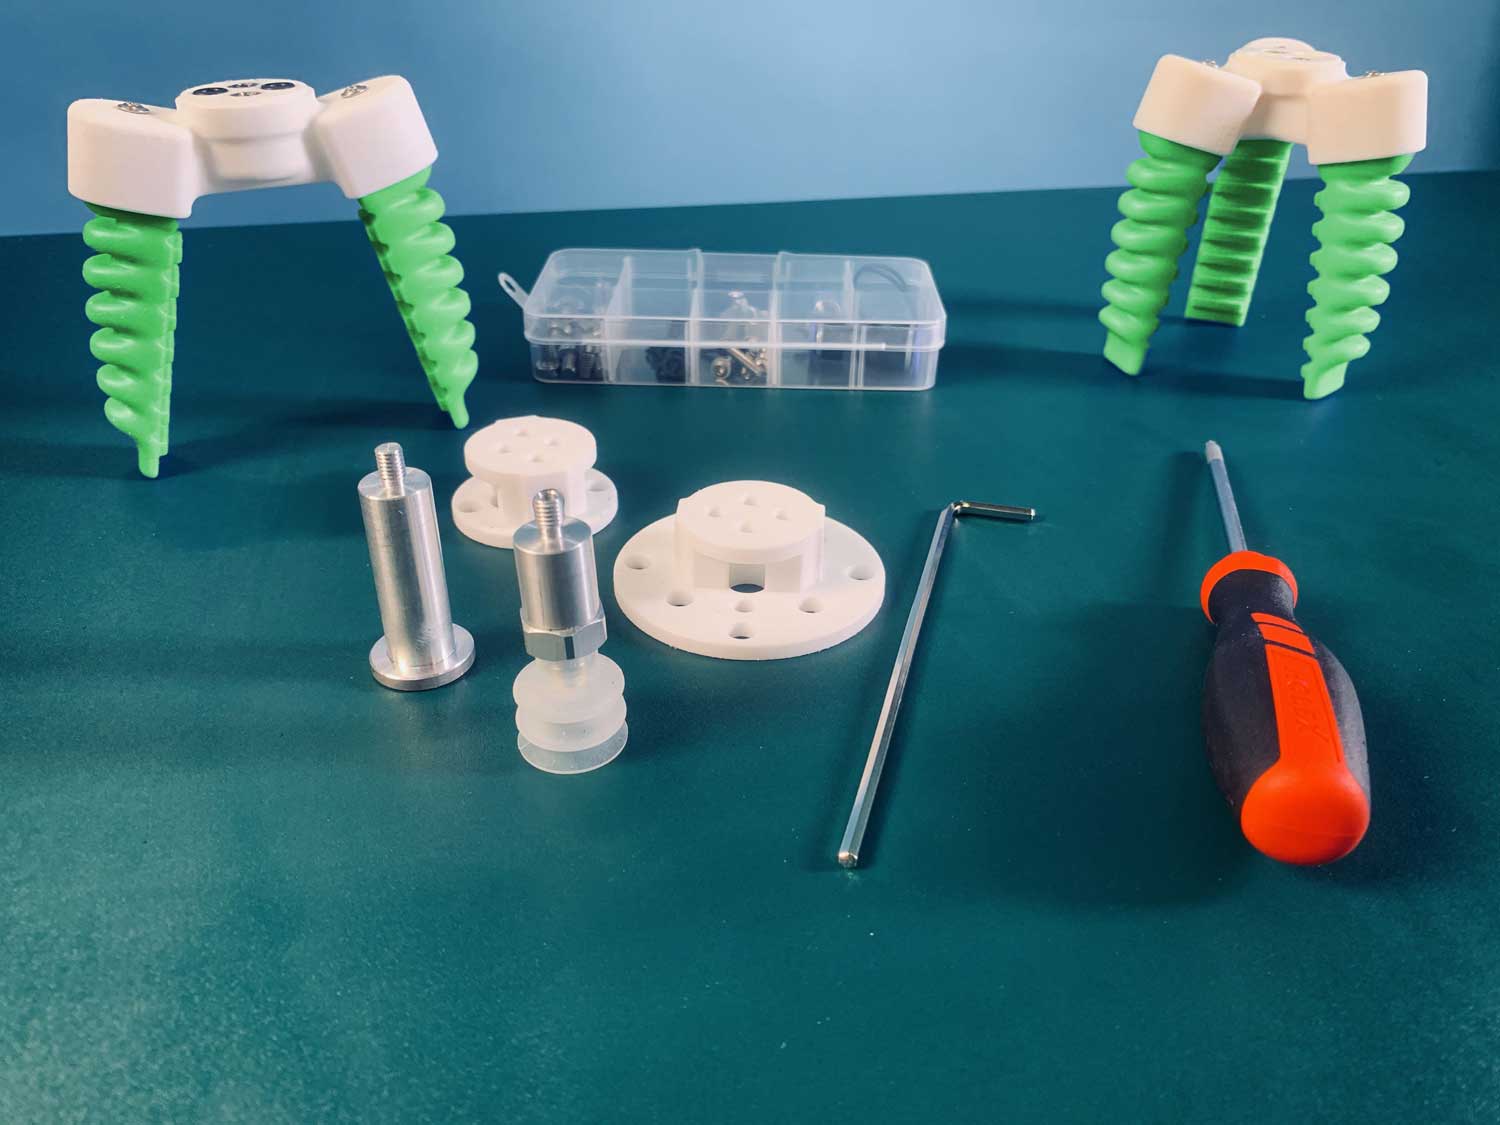 SoftGripper Kit for AI and robotic automation at schools and universities